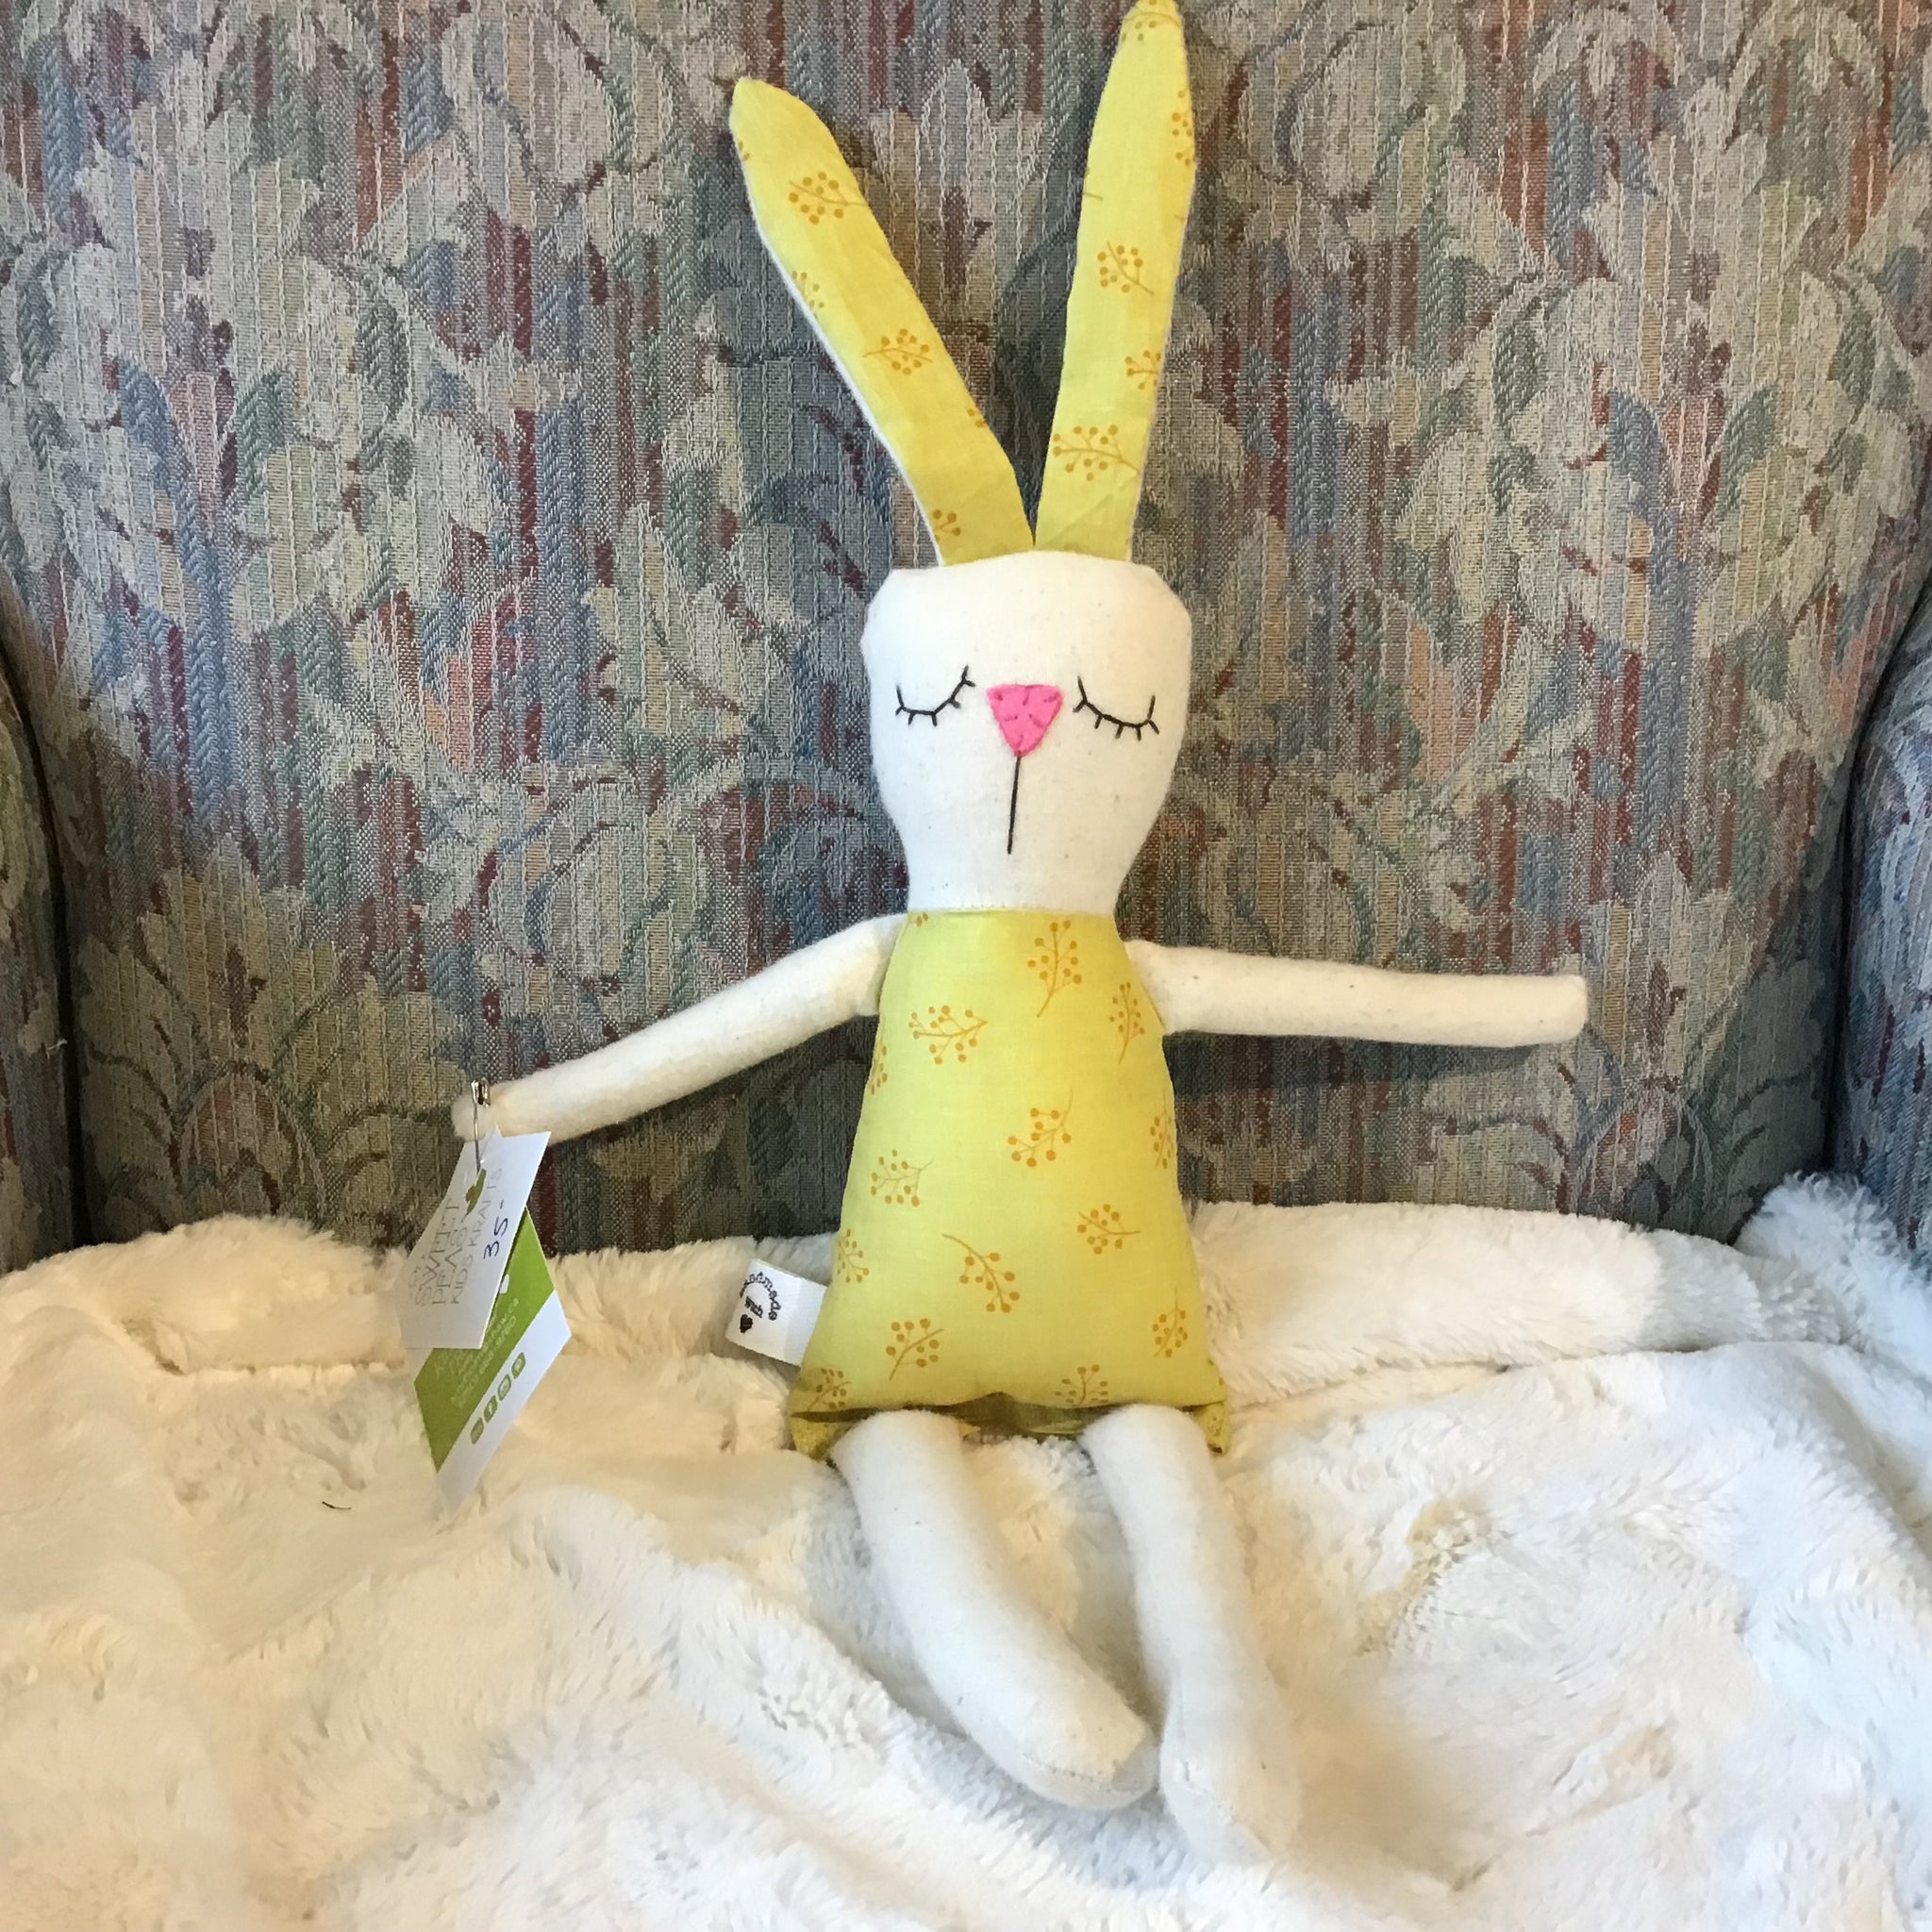 Large Sleeping Bunny - One of a Kind